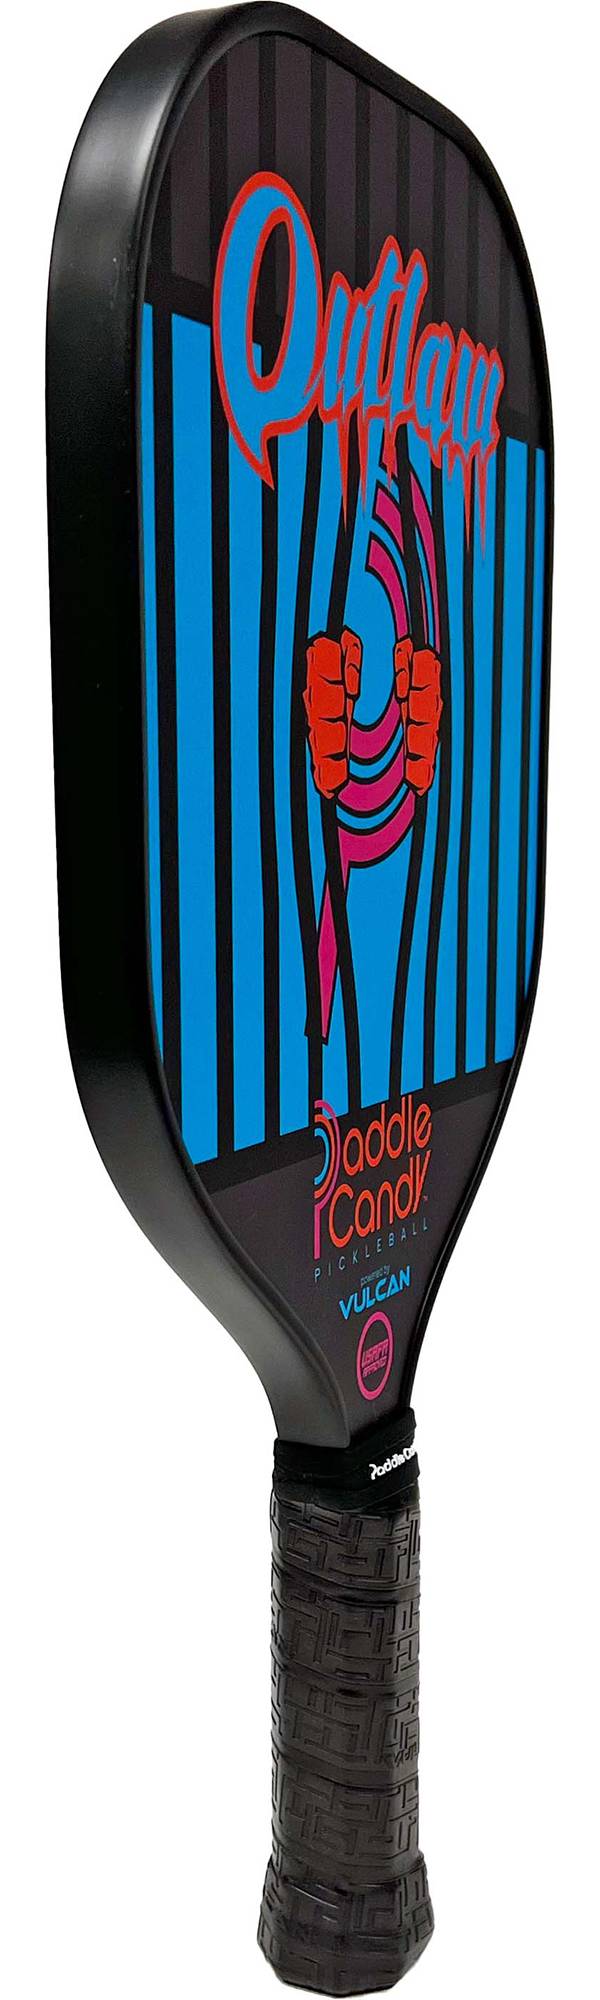 Paddle Candy Outlaw Pickleball Paddle product image